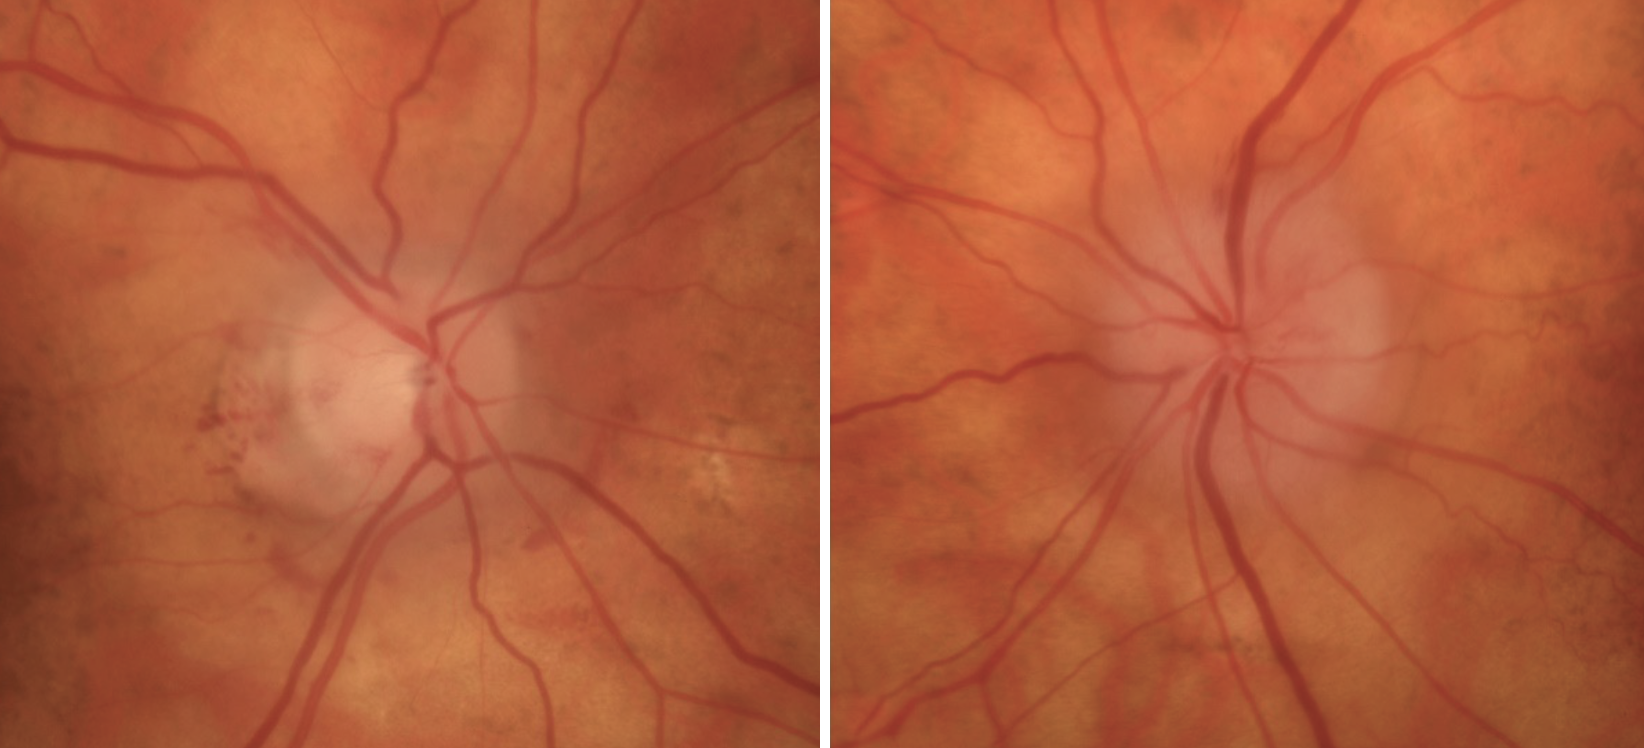 Fig. 1. Right (left) and left (right) optic nerves. The right nerve was pallid with resolving edema, and the left nerve was slightly pallid with significant edema. These clinical pictures support the time frame of the patient’s vision loss.